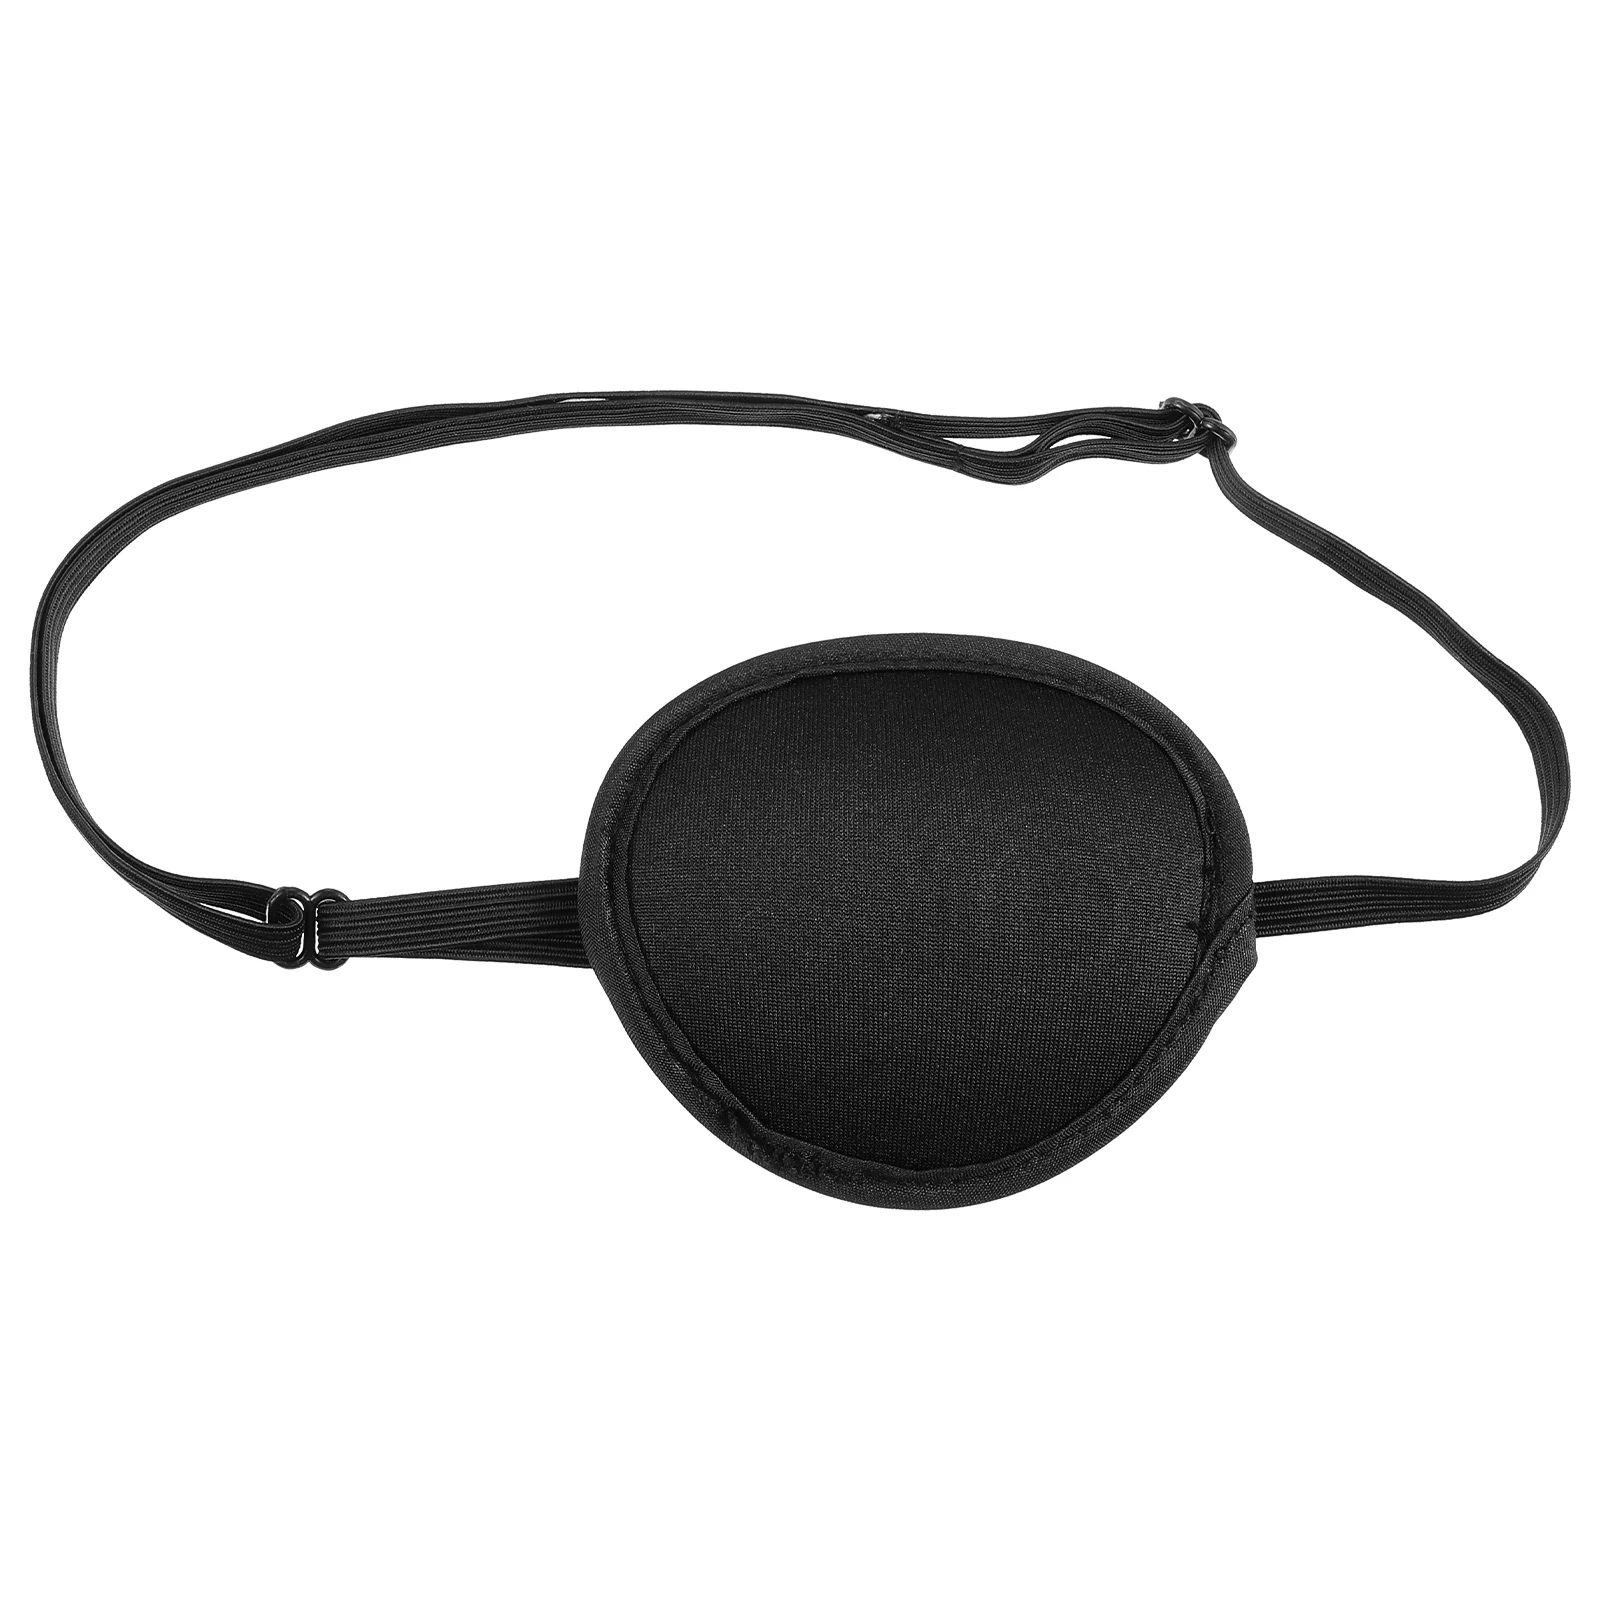 

Adjustable Single Eye Patch Eye Covers For Sleeping Left Eye Patch For Strabismus Post Surgery Eye Patch Elastic Strap Eye Patch